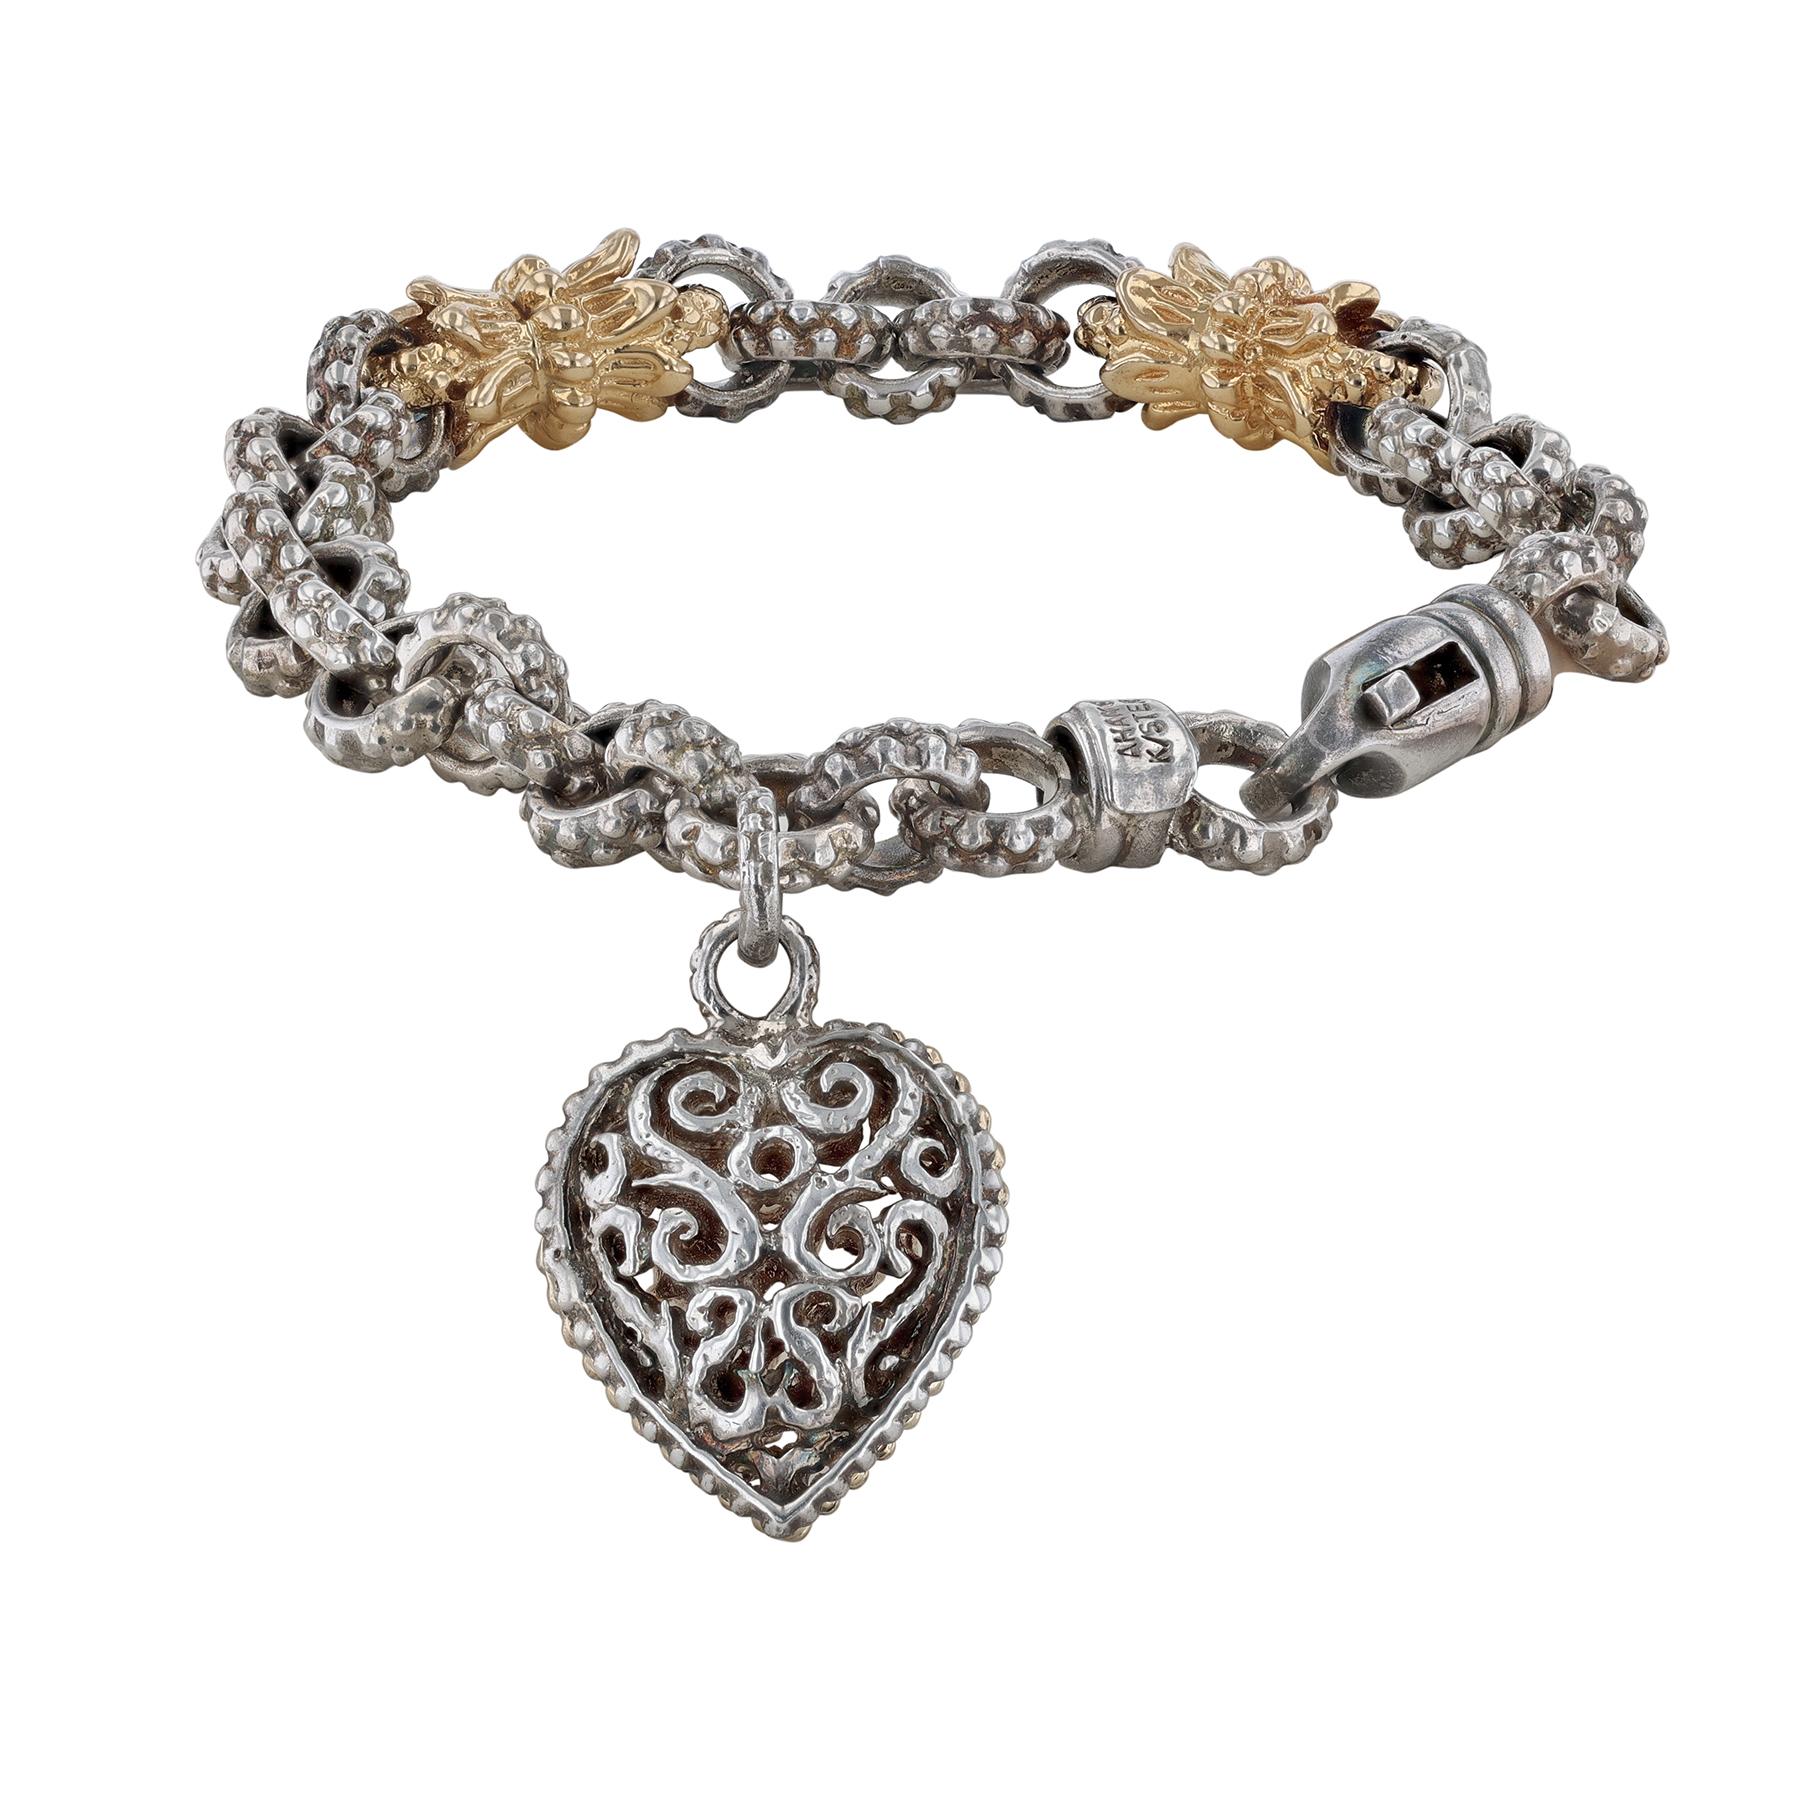 This link bracelet is made in sterling silver with a 14K gold accents heart charm. 